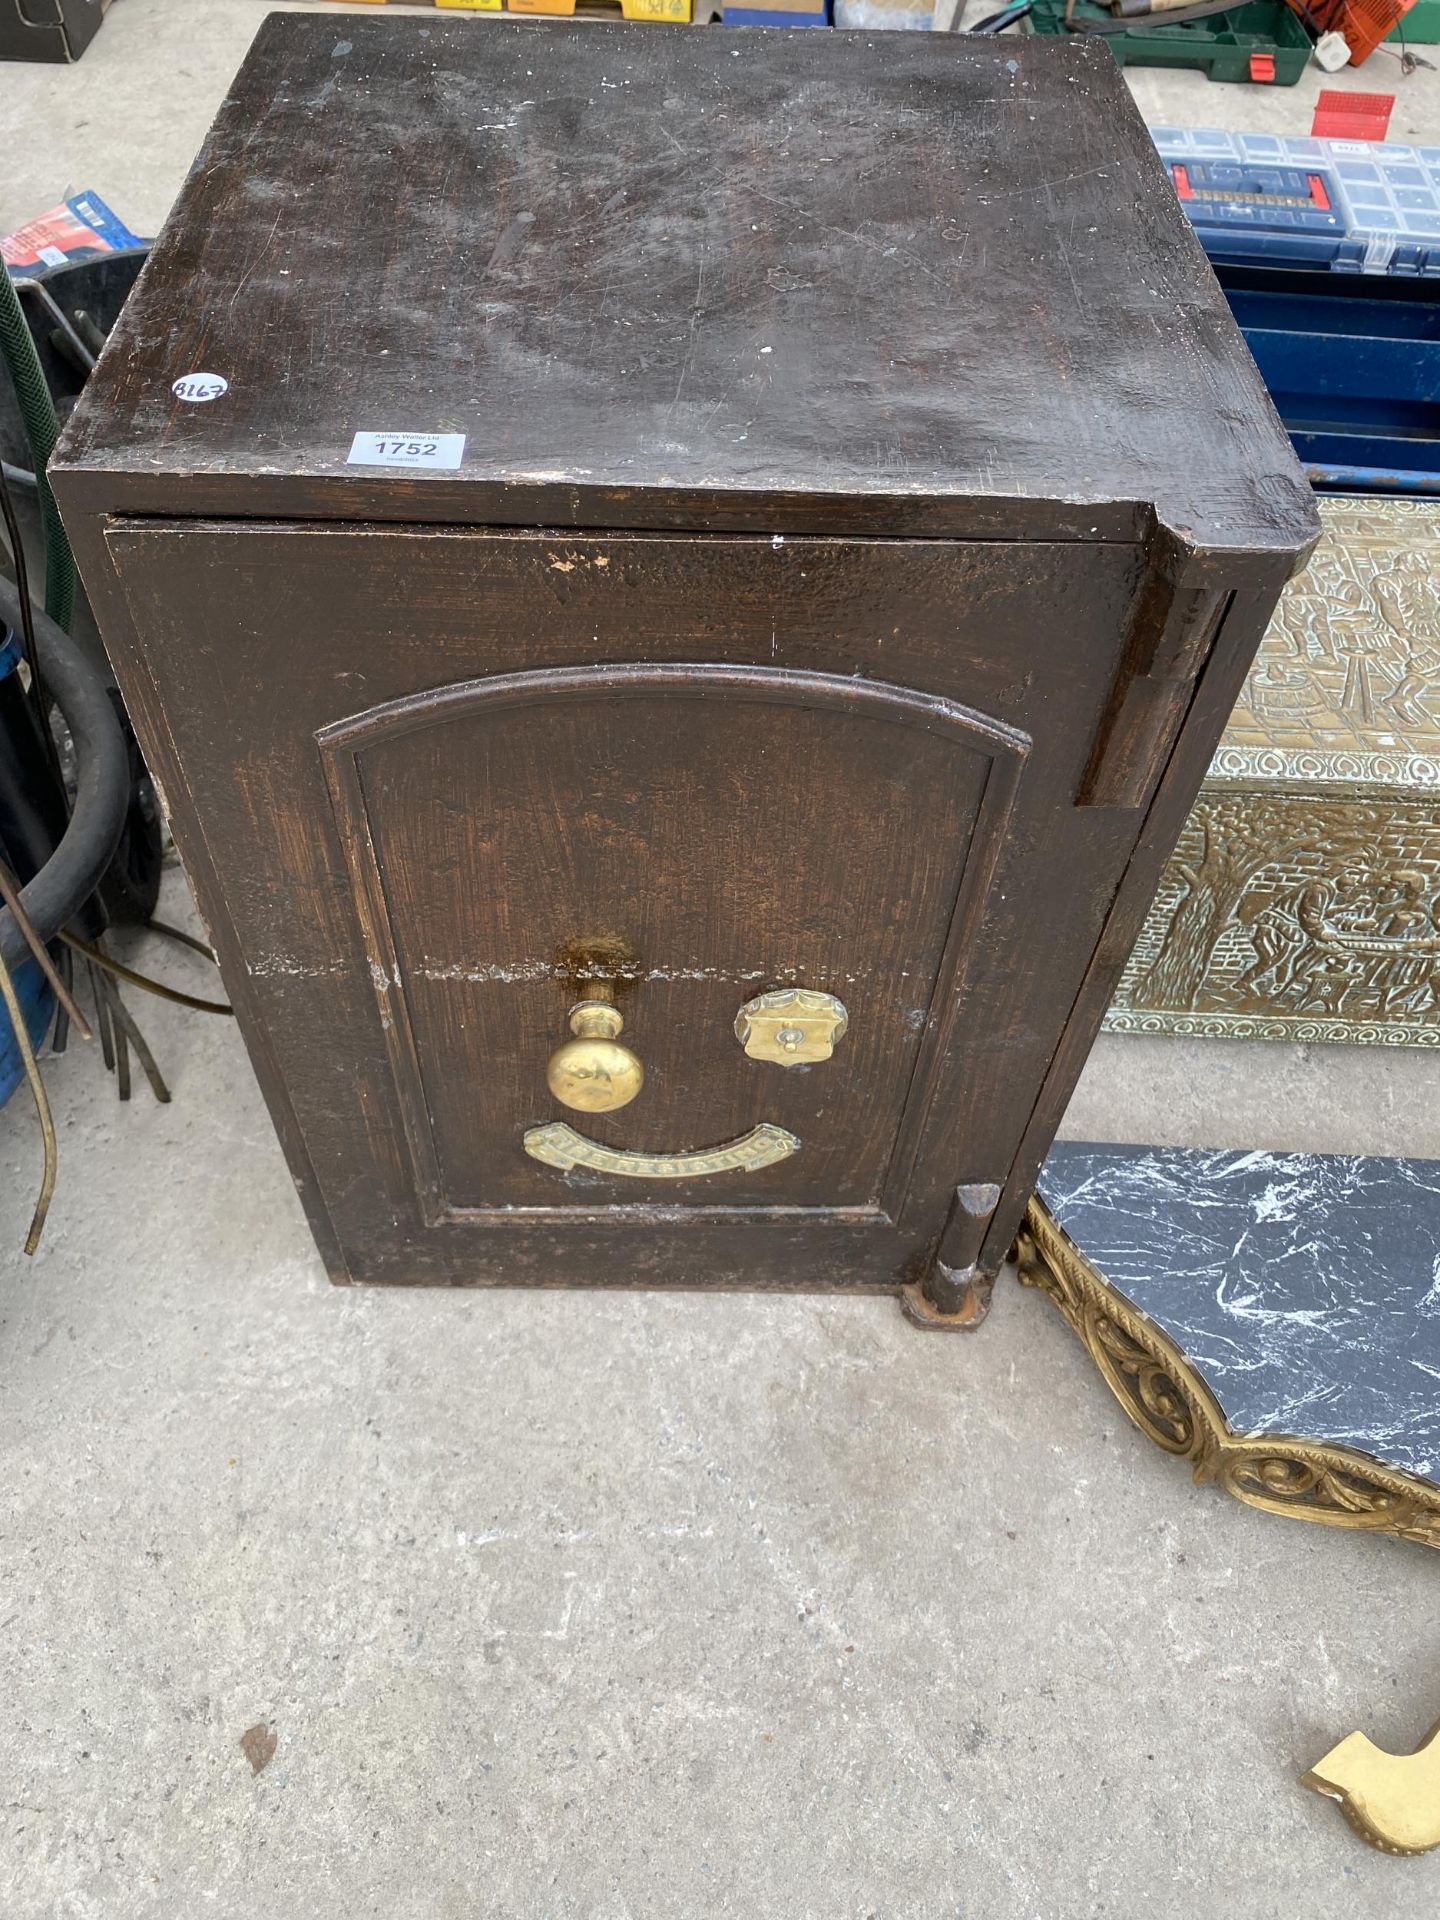 A VINTAGE HEAVY CAST IRON FIRE SAFE WITH BRASS FITTINGS (UNLOCKED BUT NO KEY PRESENT)